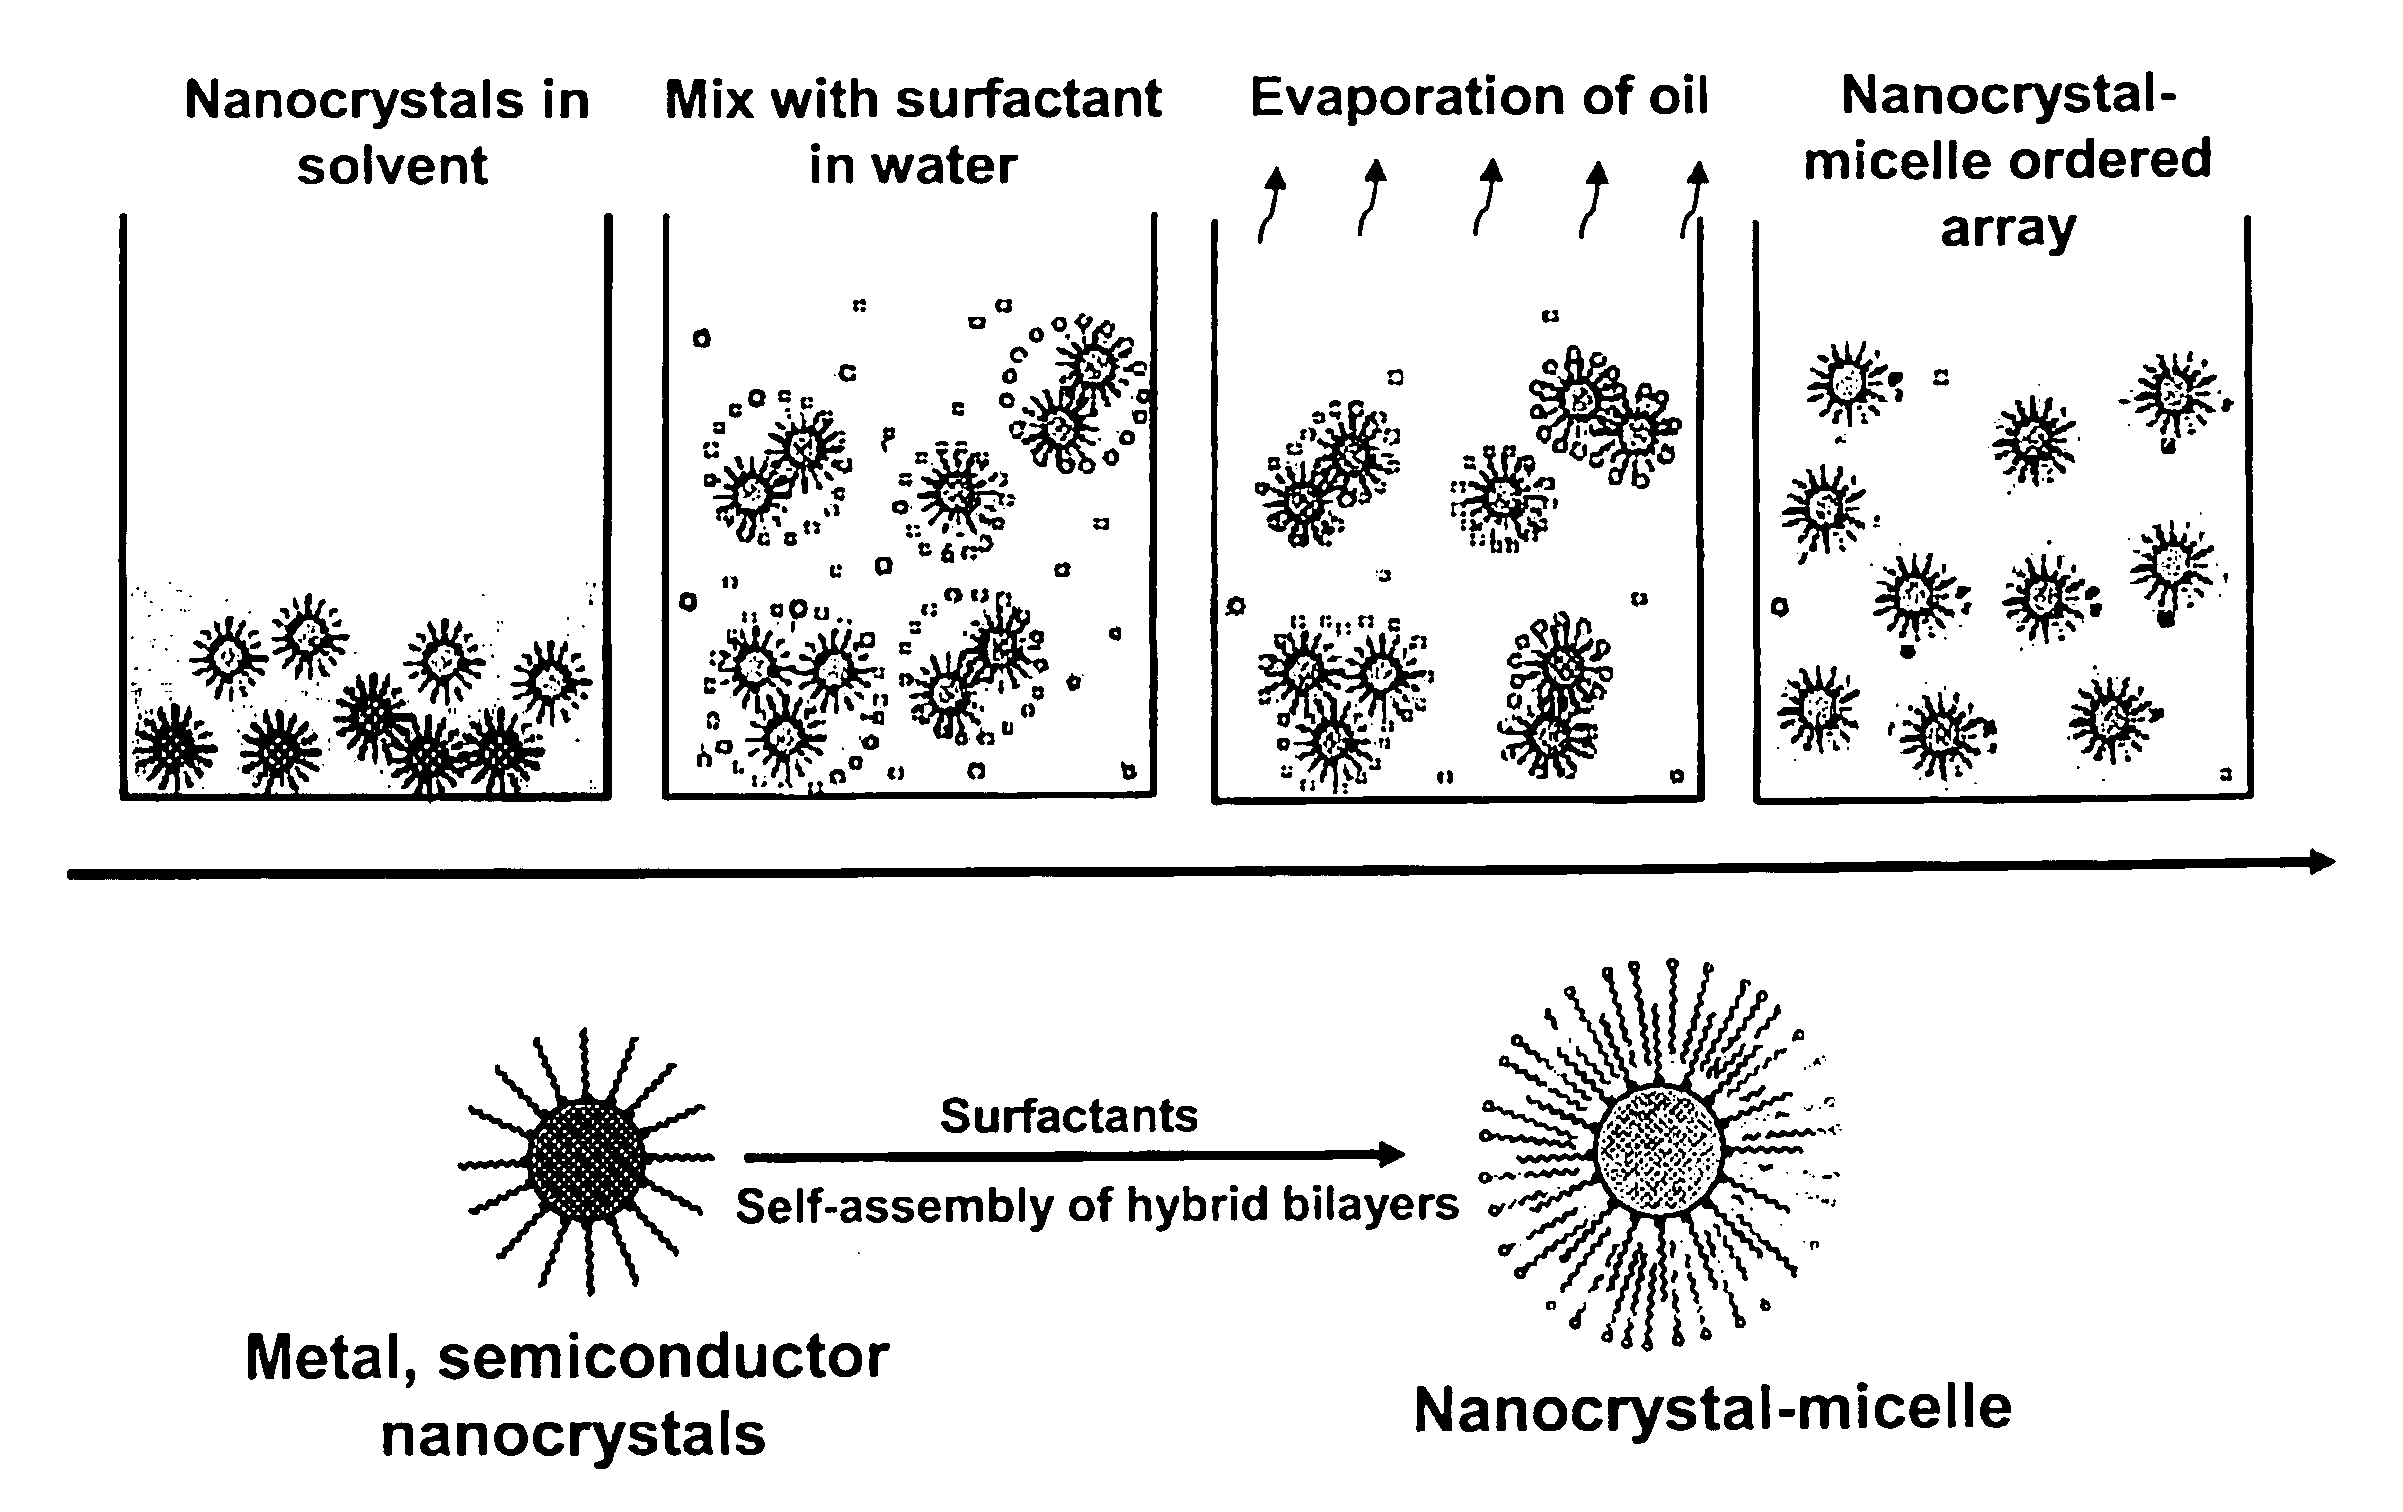 Self-assembly of water-soluble nanocrystals